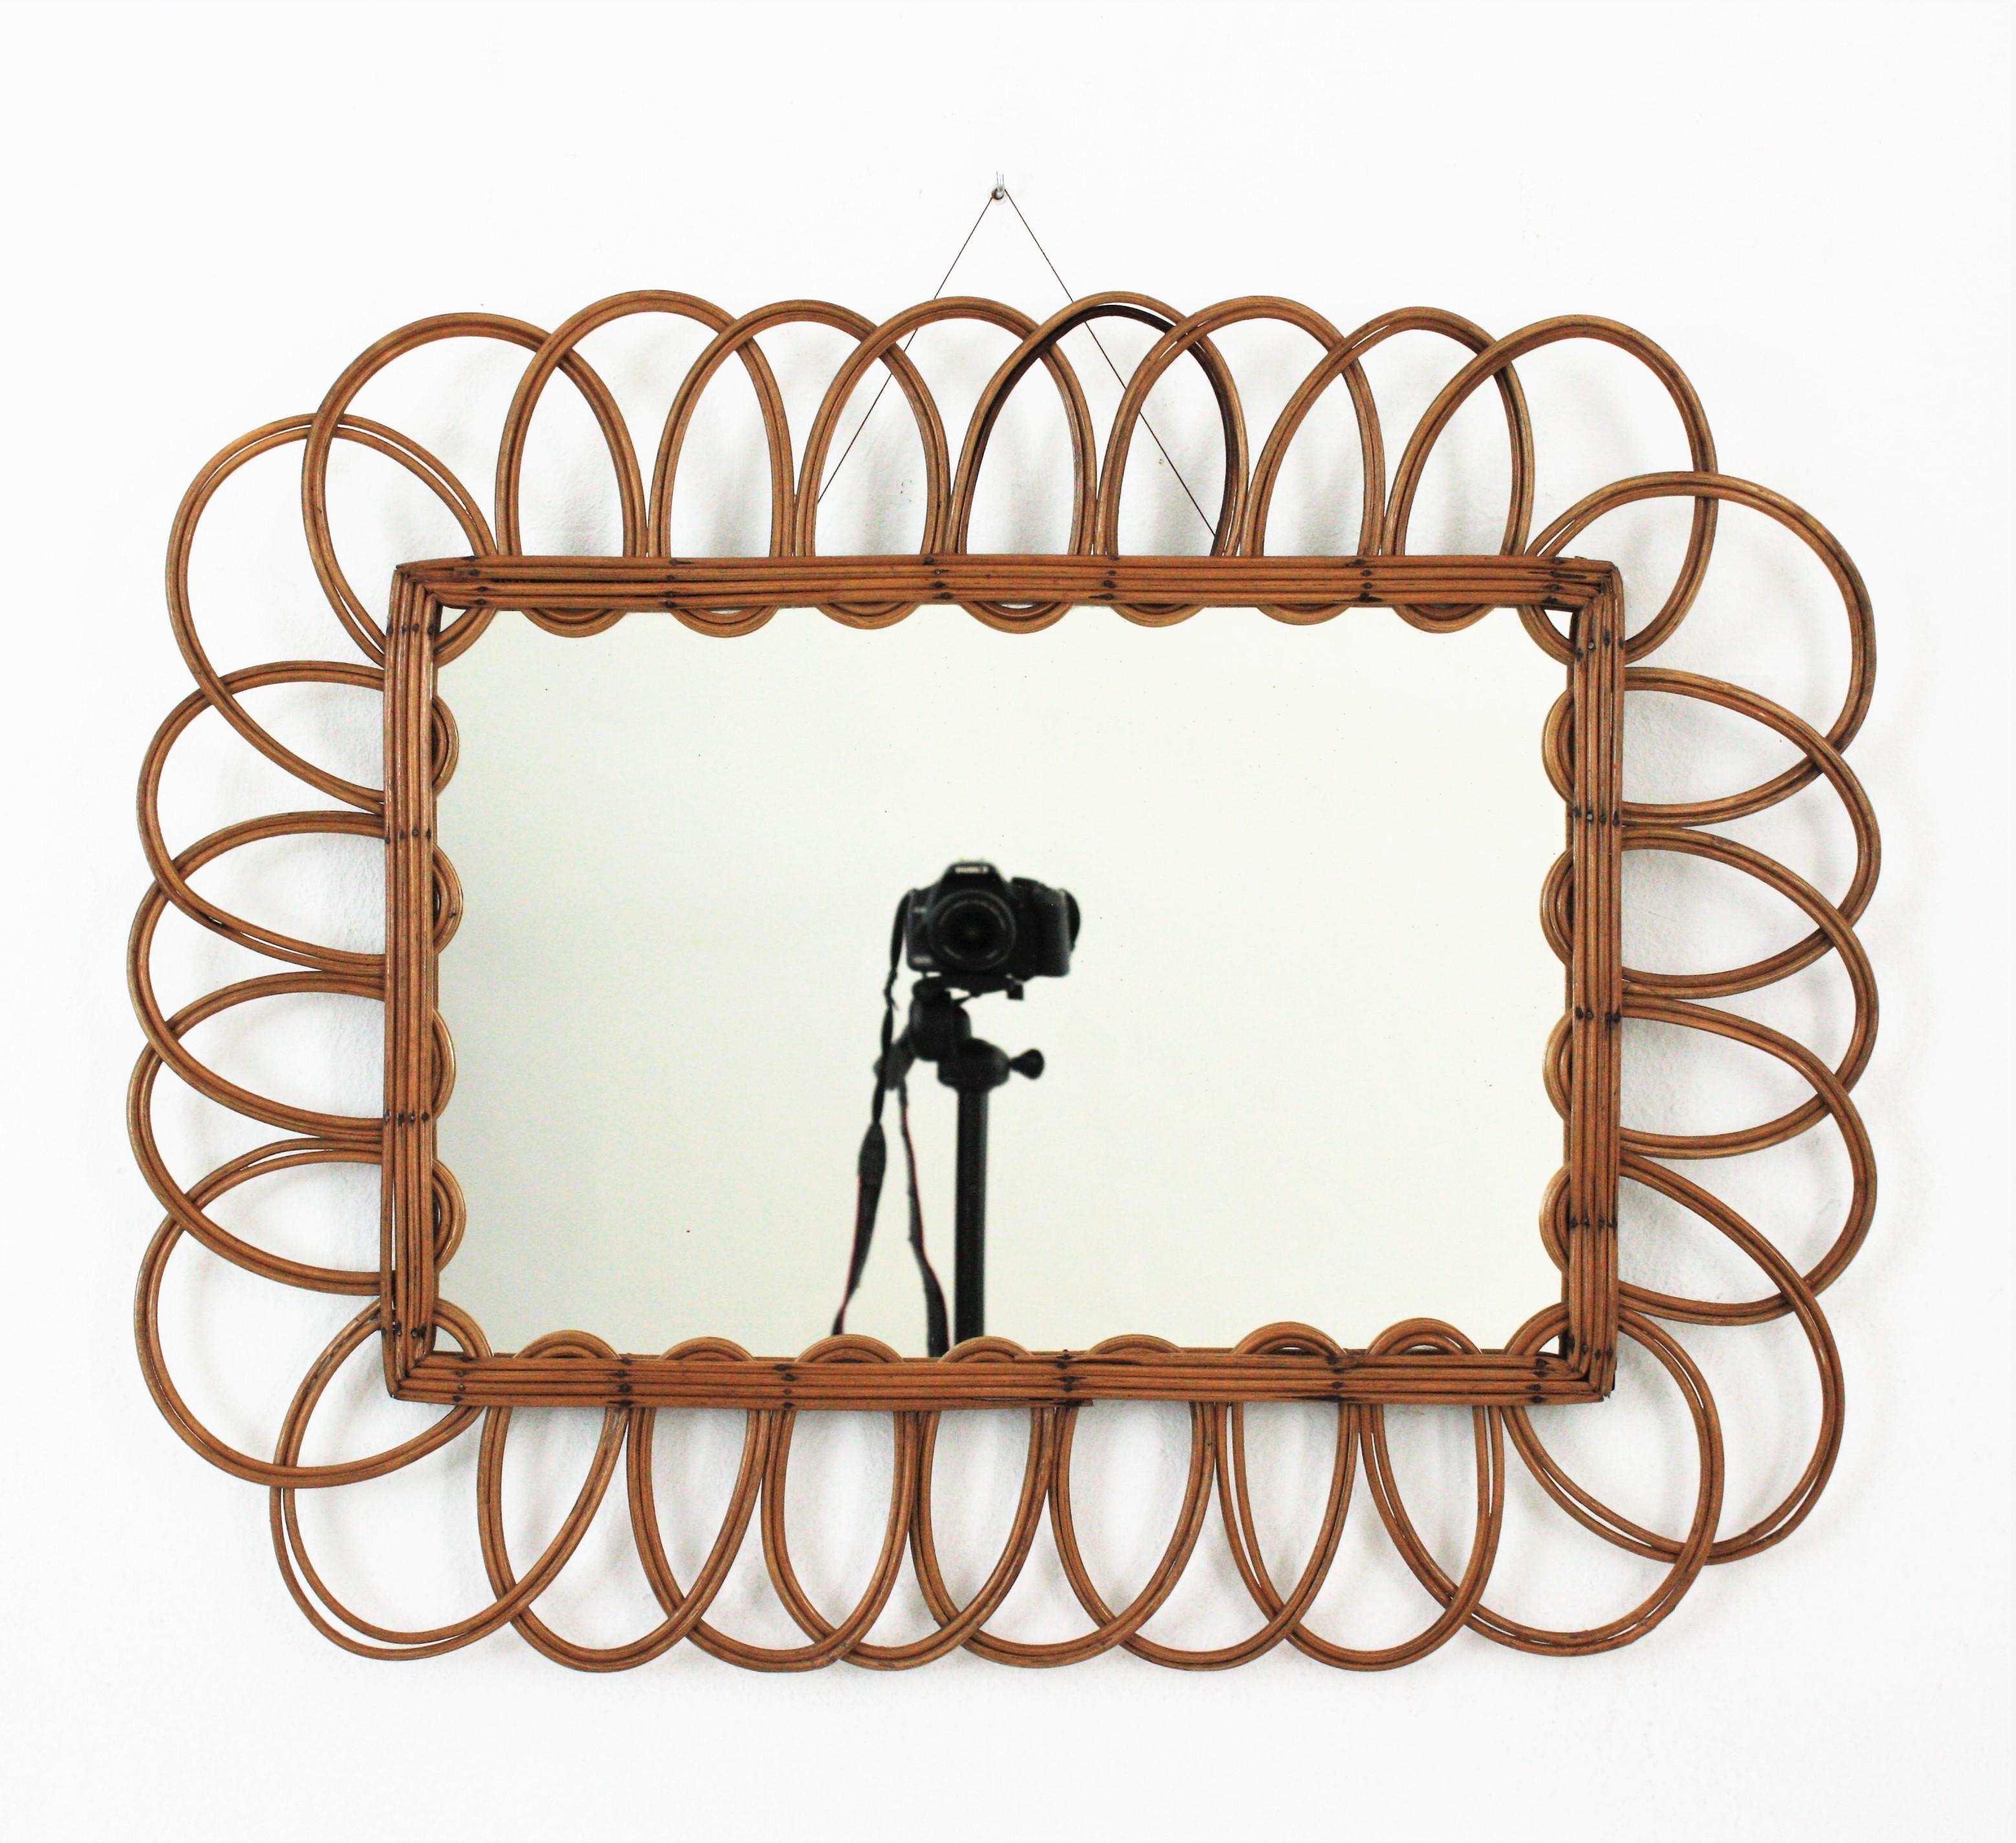 Beautiful midcentury French flower shaped sunburst mirror made in rattan. France, 1960s
This cool rattan mirror has all the taste of the French Riviera and will add a fresh accent to a beach house or countryside house decoration.
Lovely placed